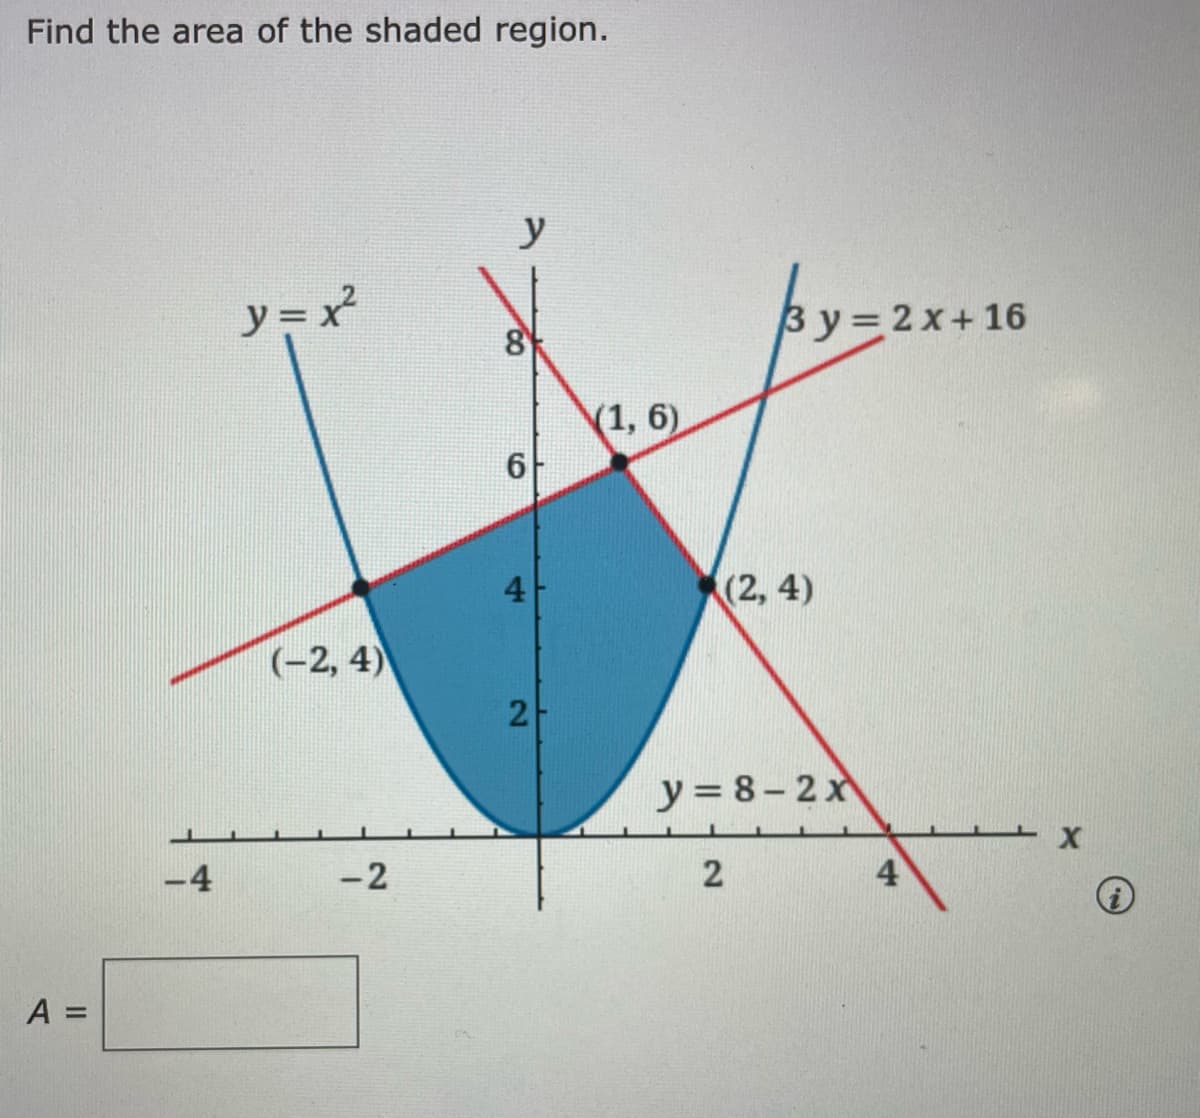 Find the area of the shaded region.
y
y = x²
8
By32x+16
(1, 6)
6-
4
(2, 4)
(-2, 4)
2
y = 8-2 x
-4
-2
4
A =
2.
